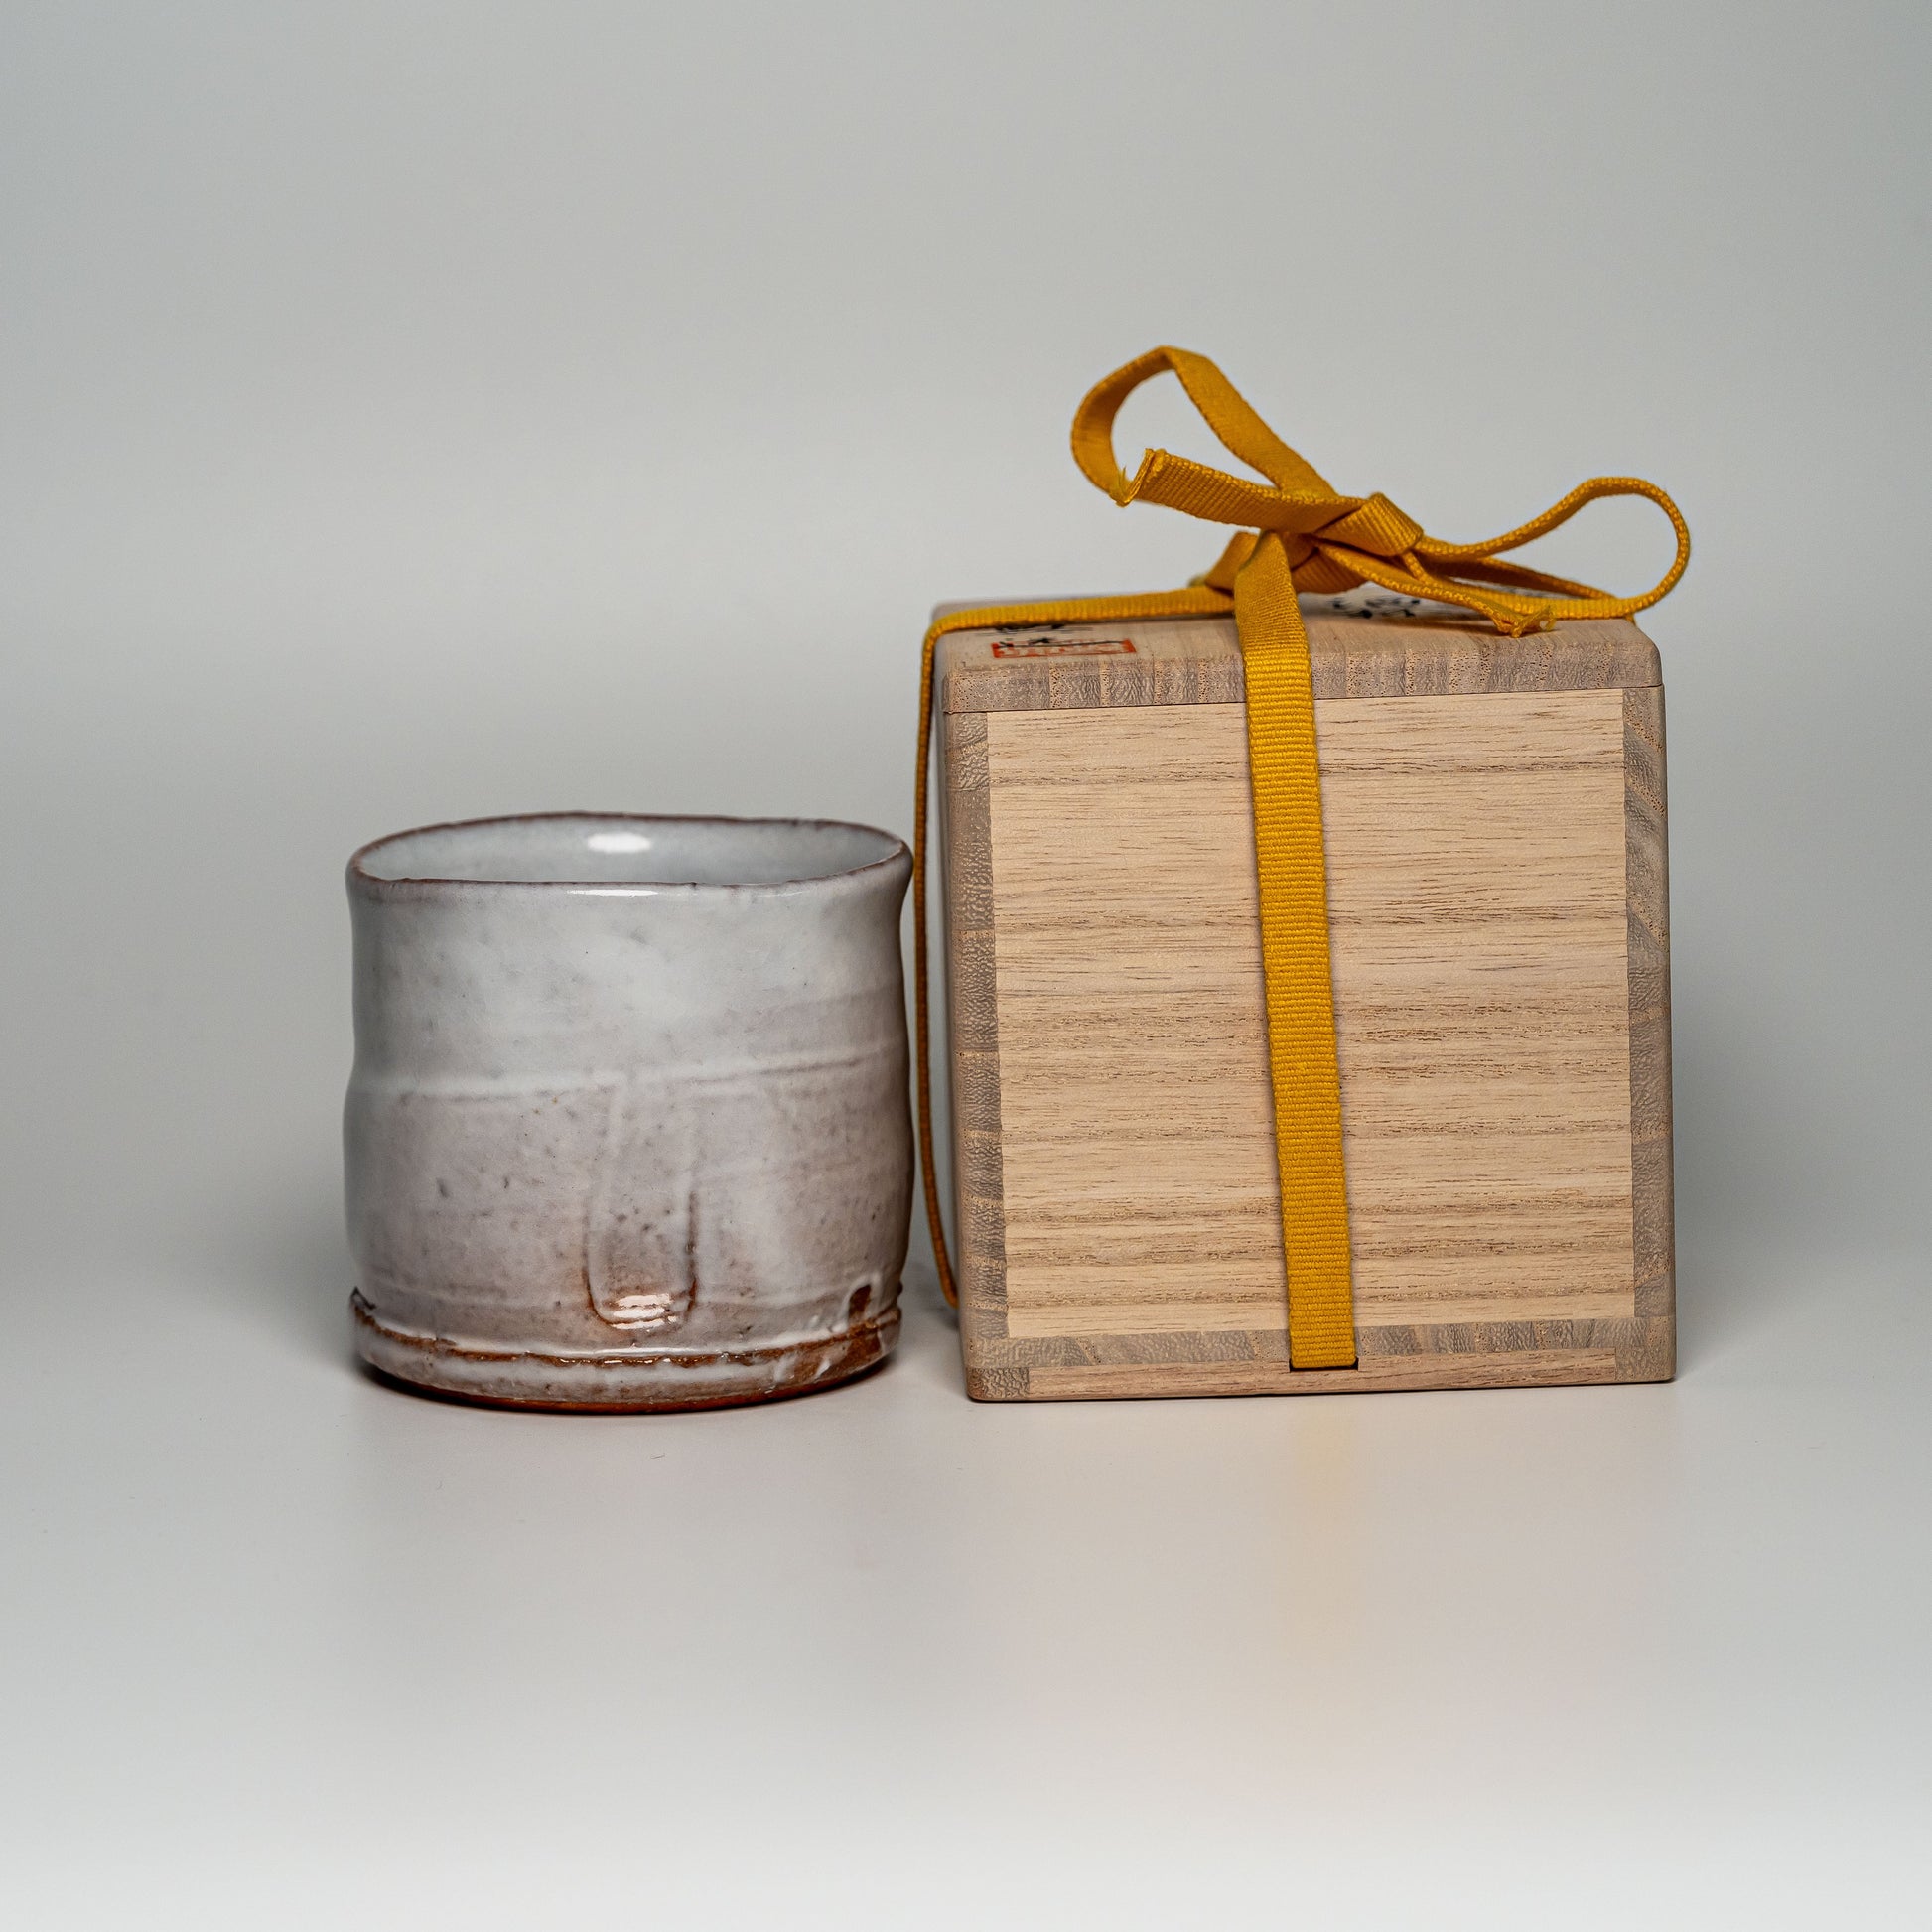 A white Hagi yaki shochu cup next to its wooden box on a white background